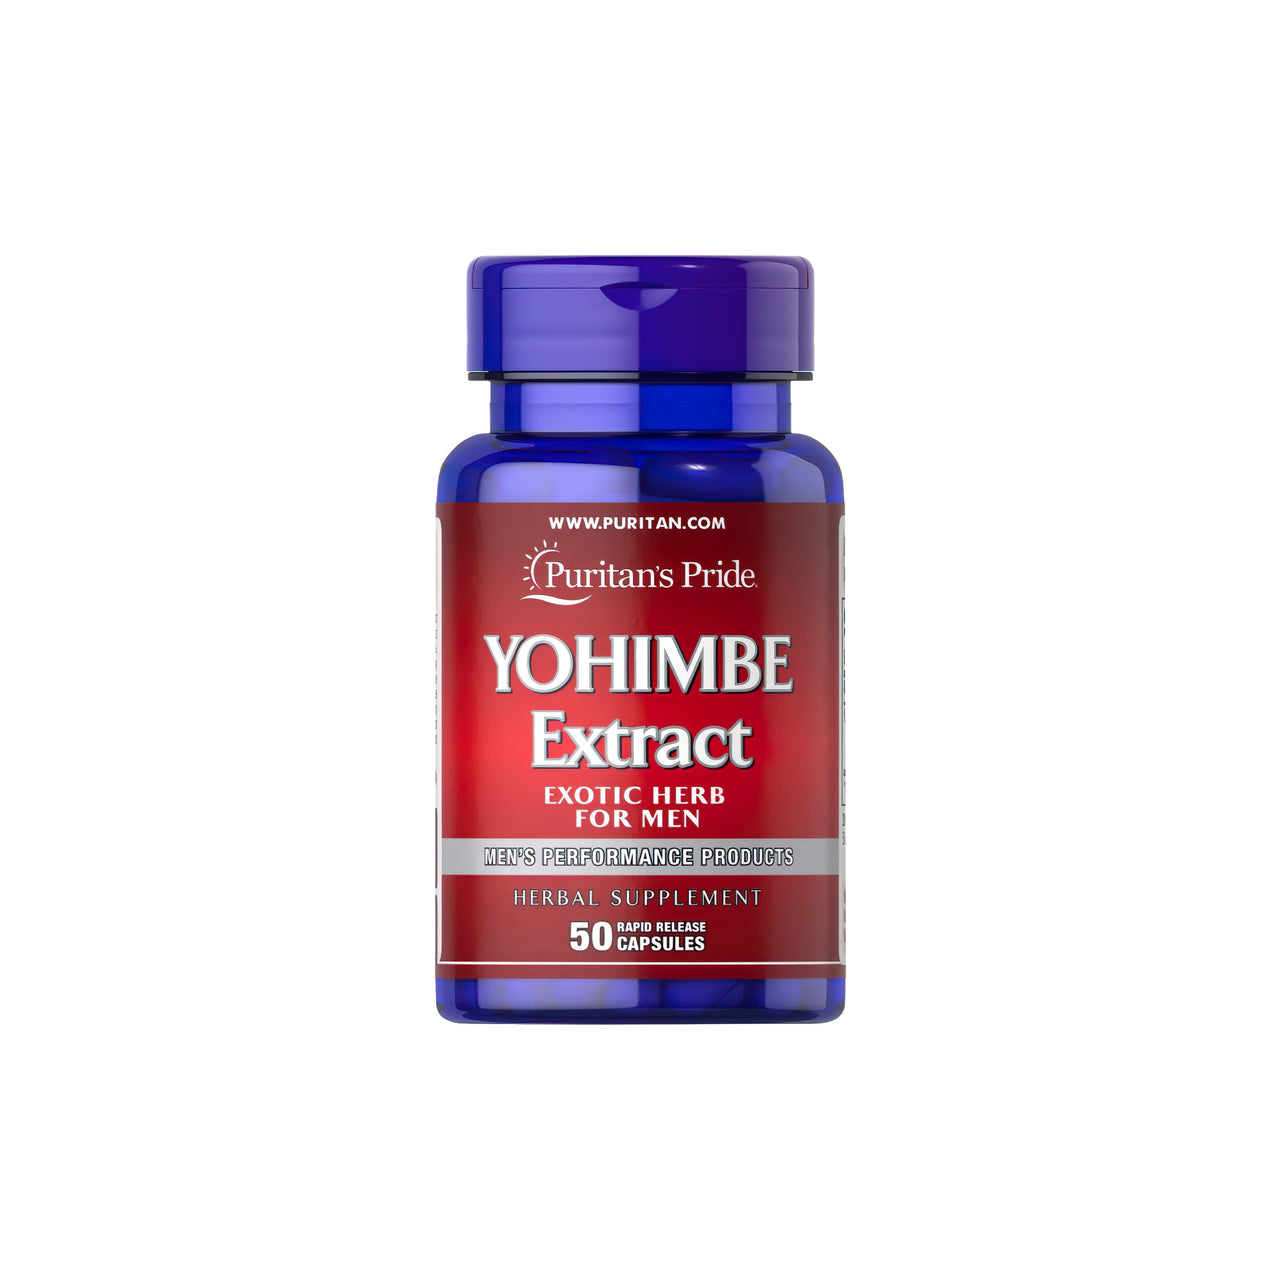 Boost male sexual energy with Puritan's Pride Yohimbe extract 250 mg in these 60 capsules.